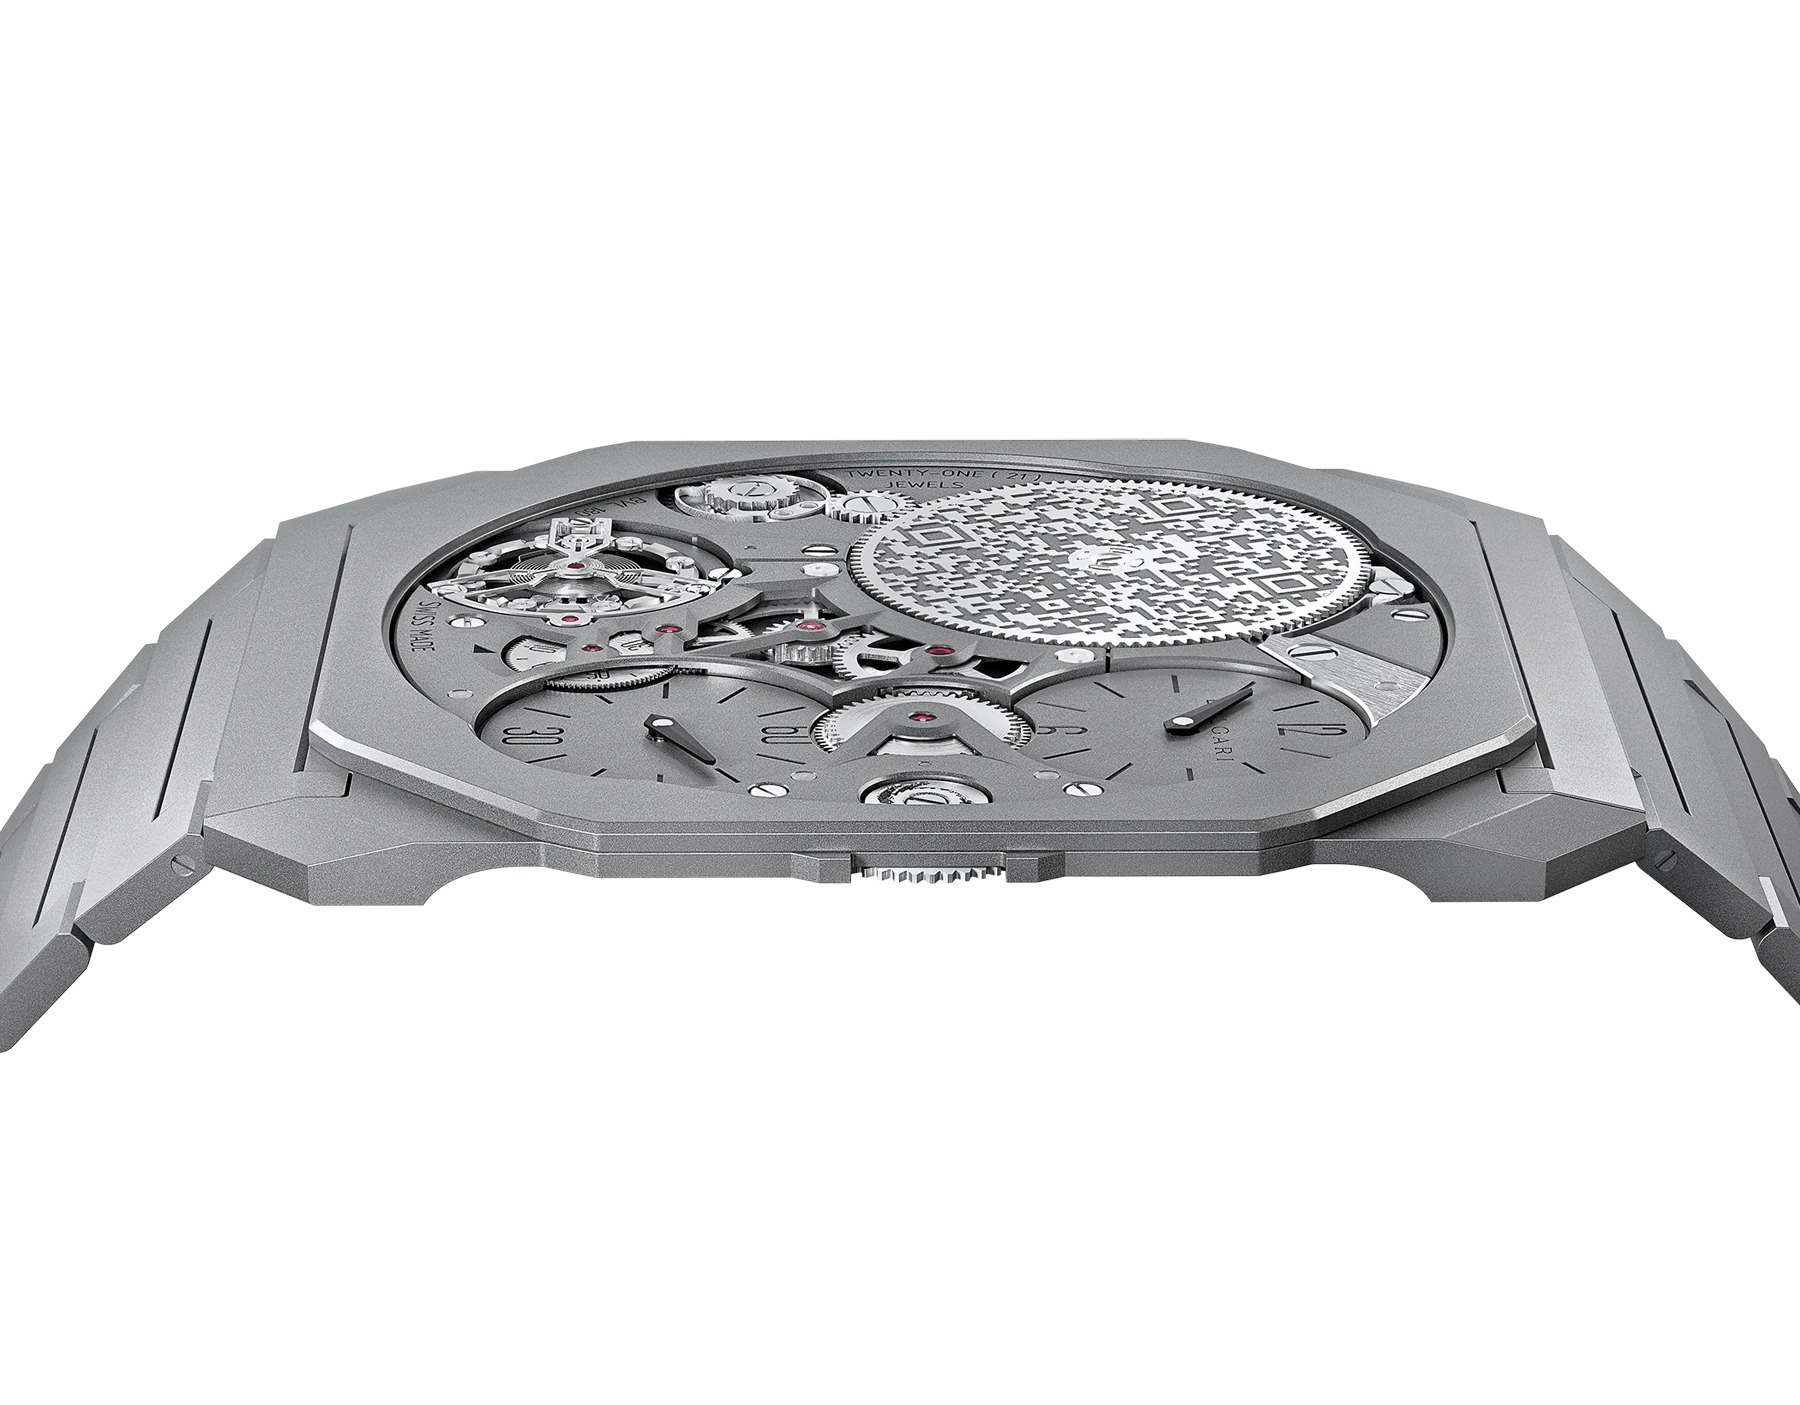 Bulgari created the world's thinnest mechanical watch, and it comes with NFT